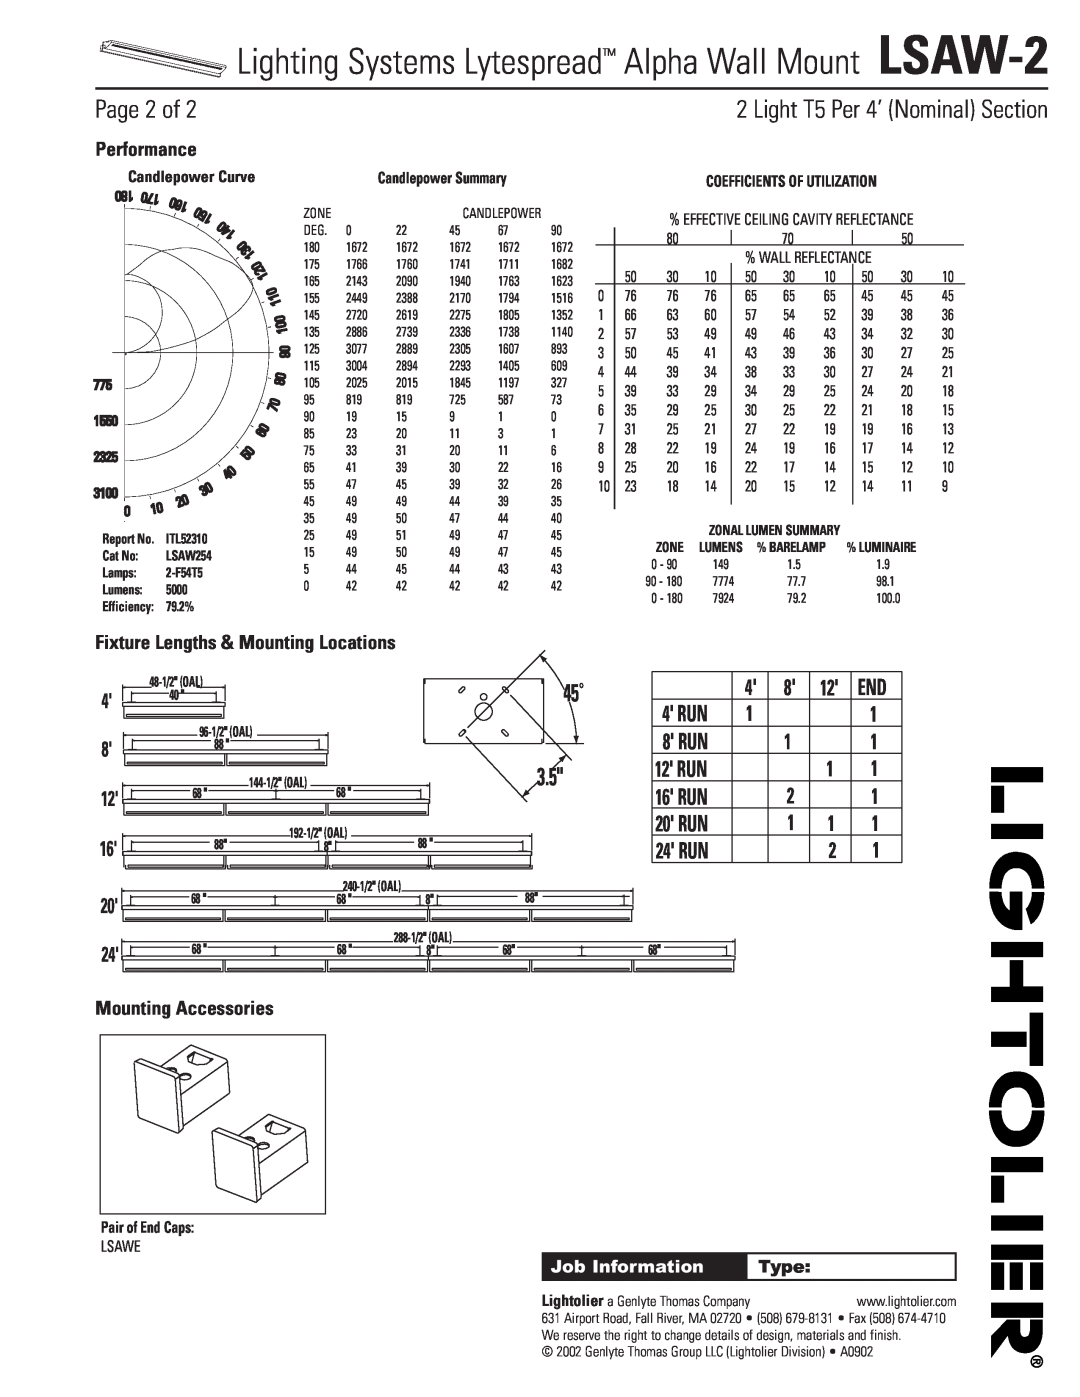 Lightolier LSAW-2 Page 2 of, Performance, Fixture Lengths & Mounting Locations, Mounting Accessories, 4 RUN, 8 RUN, Type 